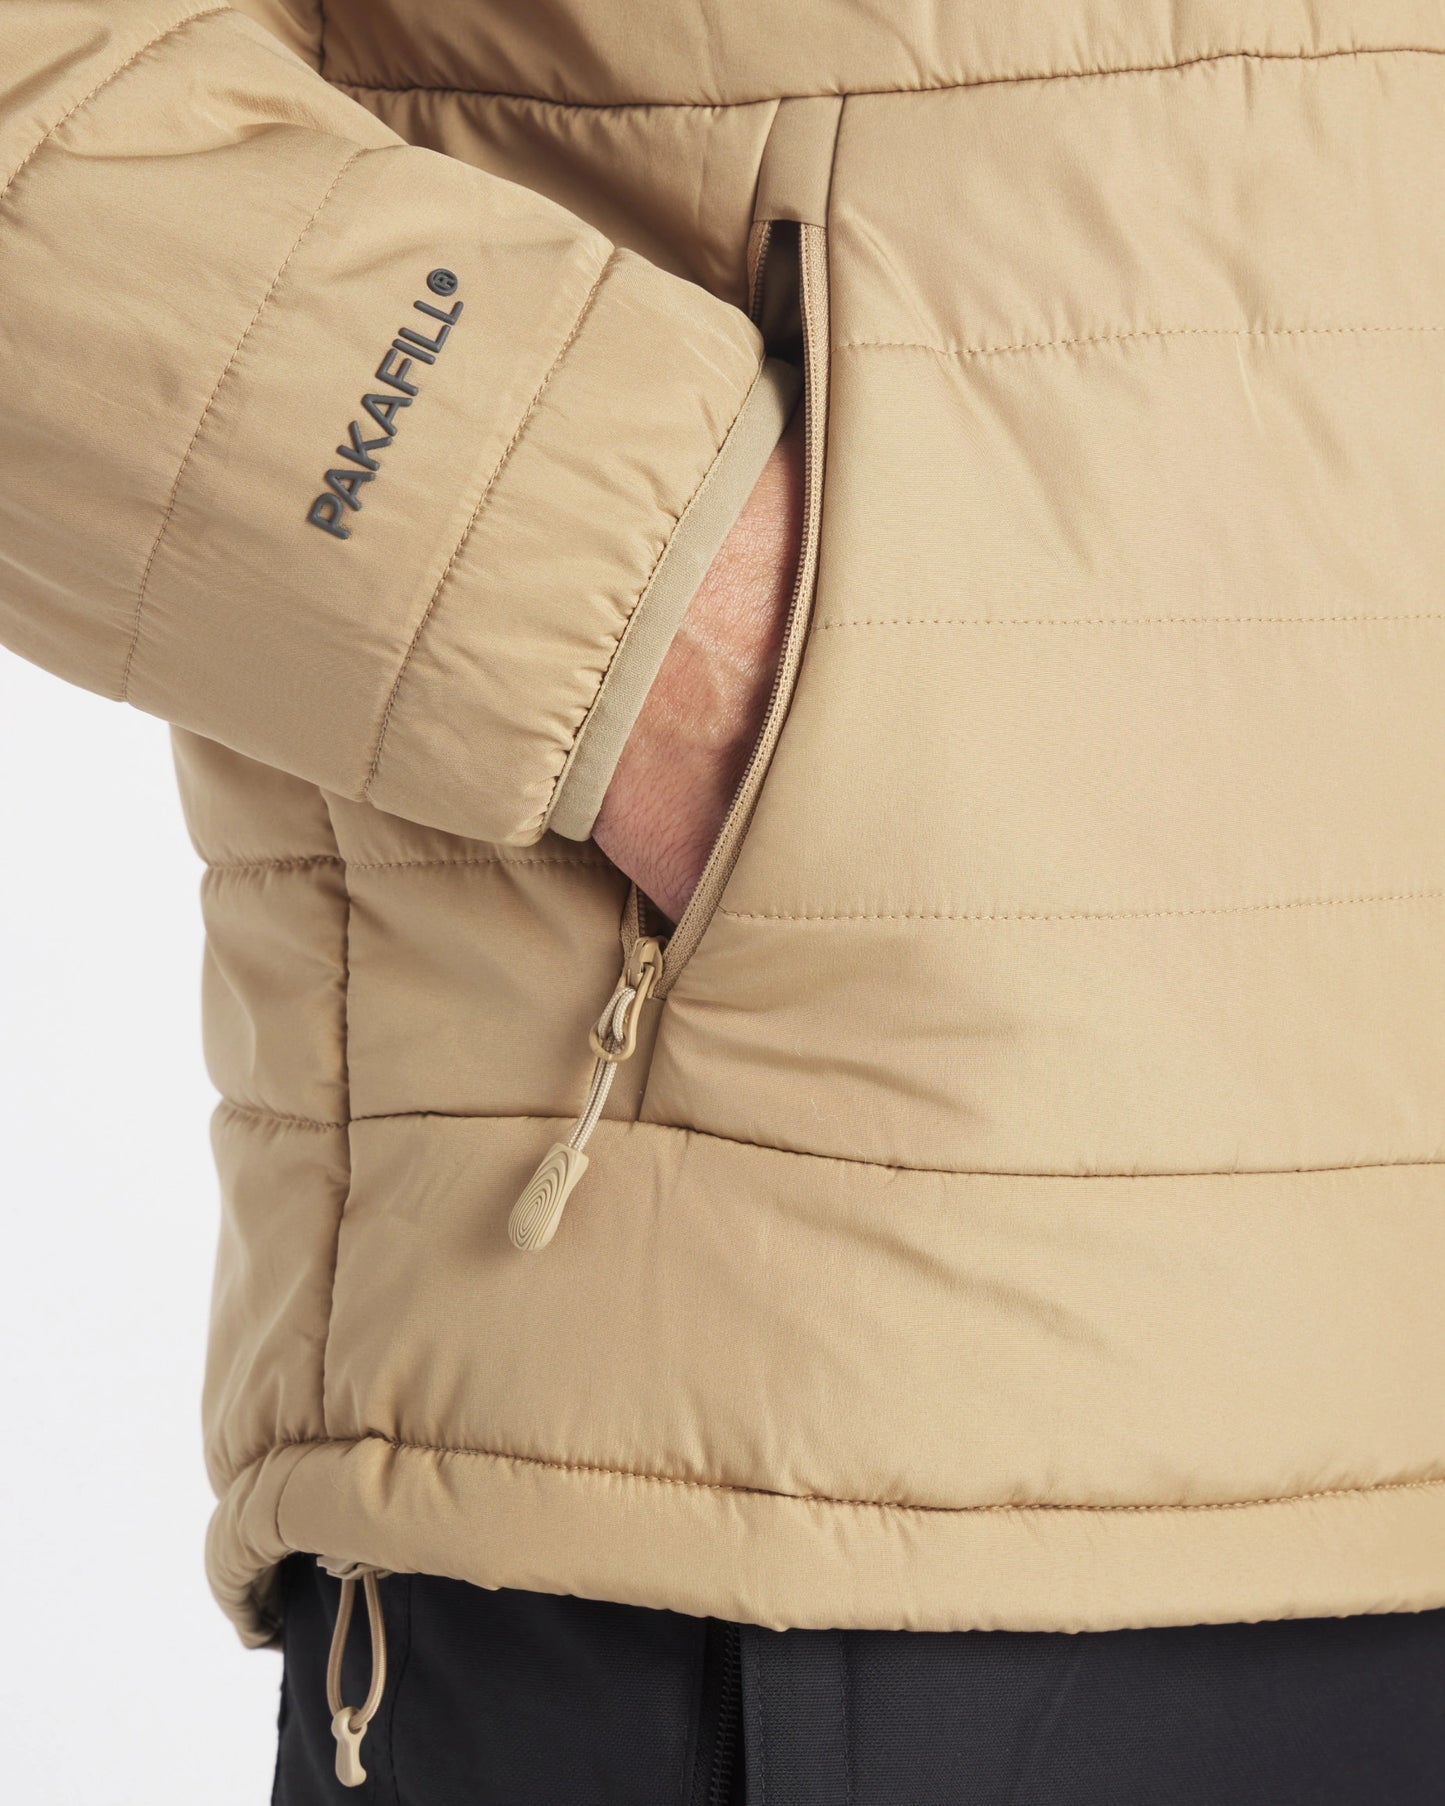 zipper pocket on mens puffer jacket with draw cord and lock